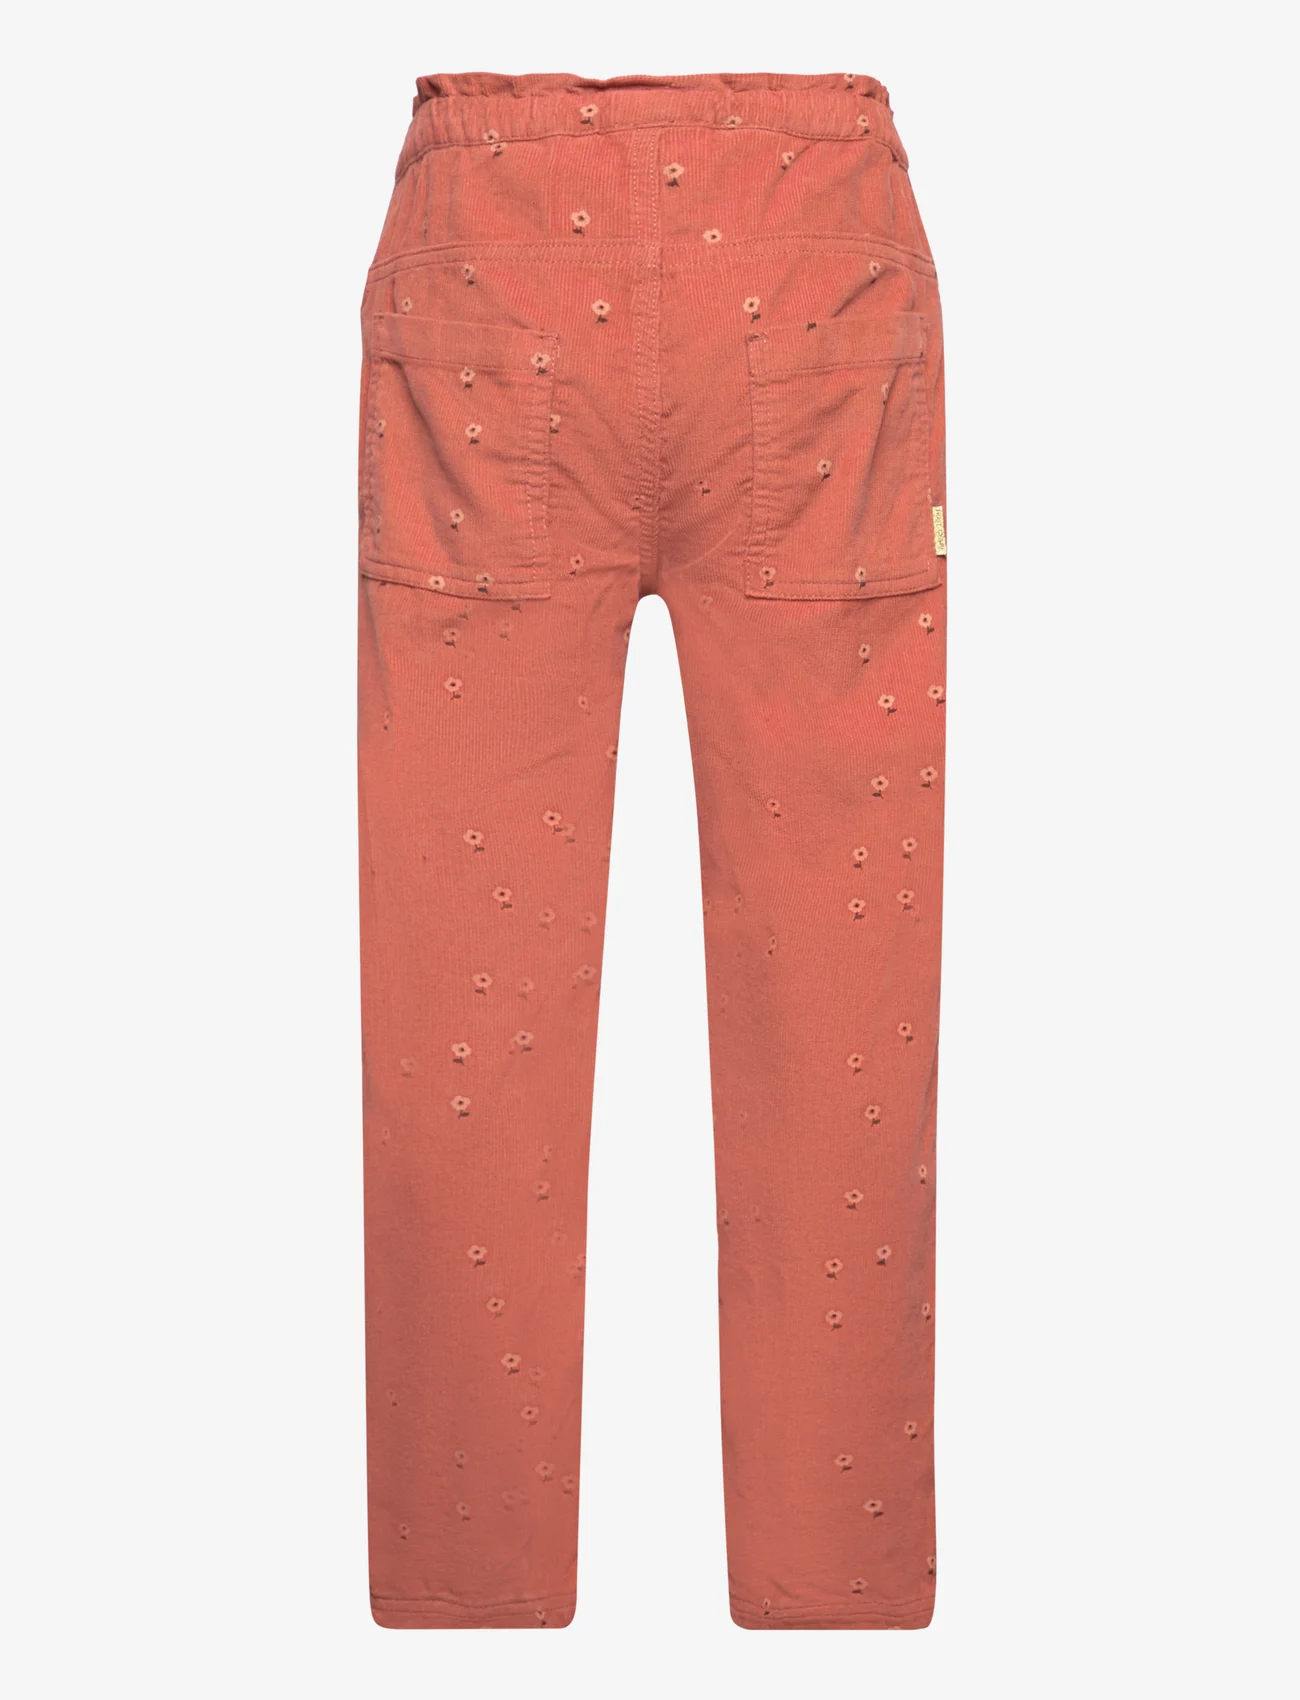 Hust & Claire - Tinna - Trousers - lowest prices - red clay - 1